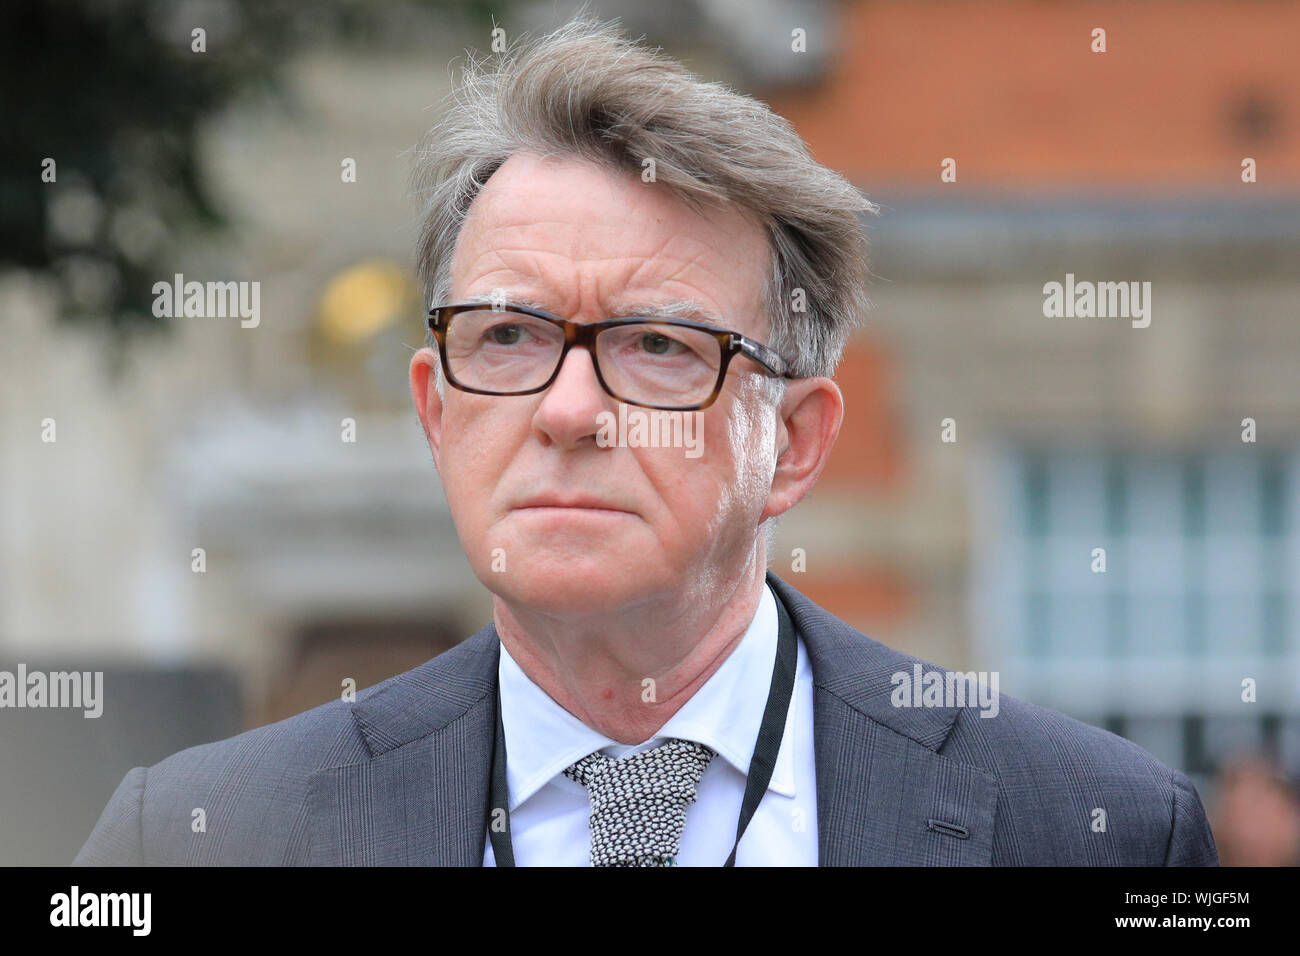 Westminster, London, 03rd Sep 2019. Peter Mandelson, The Lord Mandelson, Labour. Politicians are being interviewed on College Green in a 'media city' closed off area opposite Parliament. Credit: Imageplotter/Alamy Live News Stock Photo